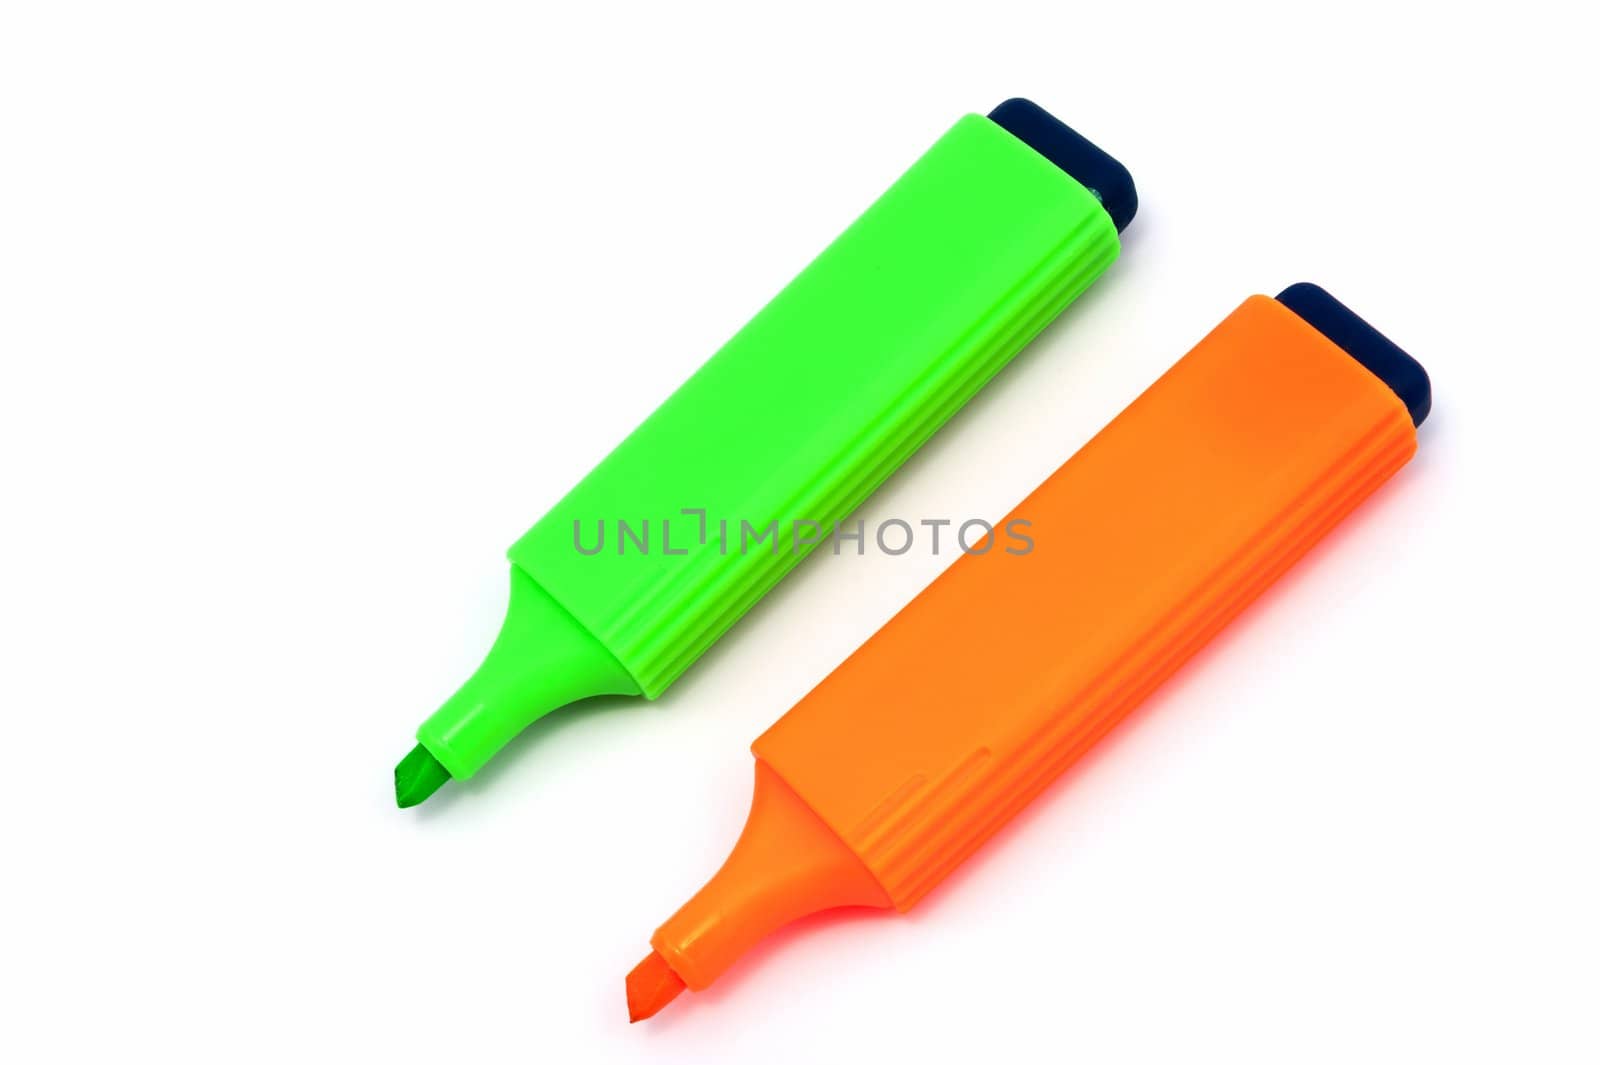 Two different color highlighters on white background